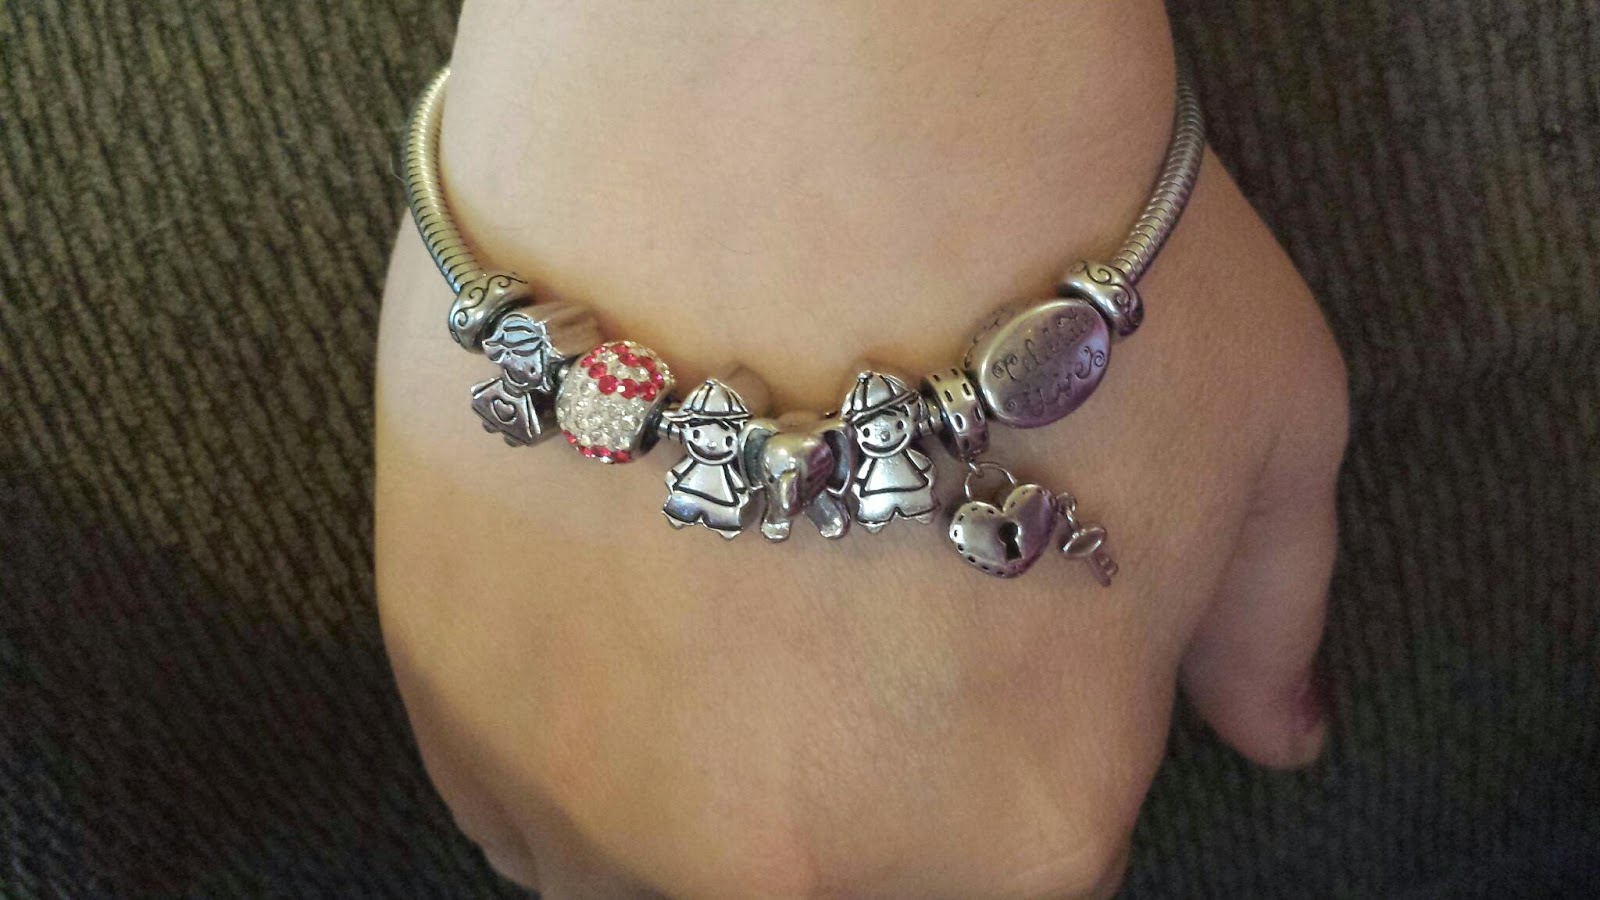 Tangled Up In My Strings-N-Blingz : Pandora Charm Bracelets VS. Connections  from Hallmark